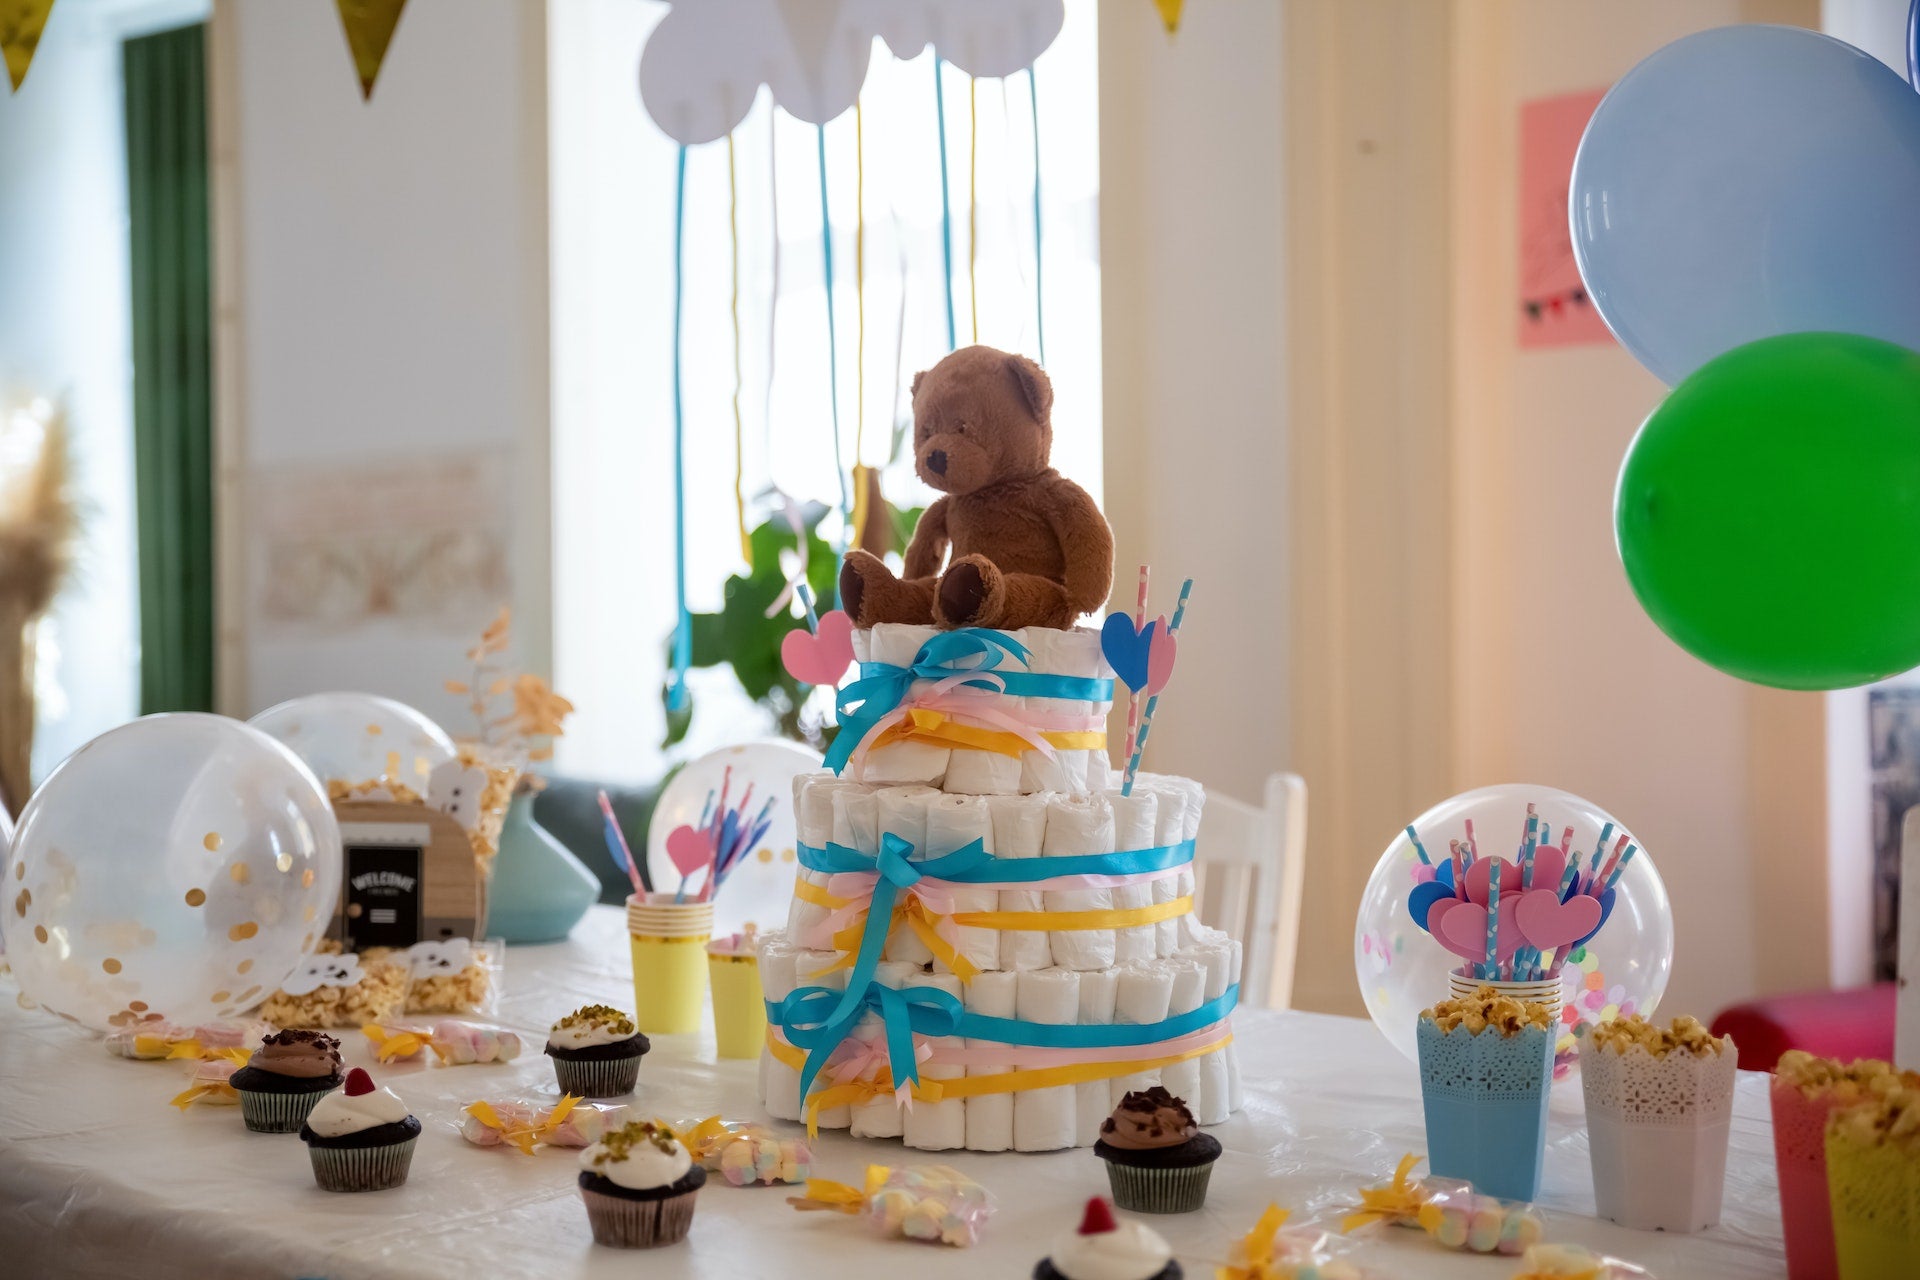 A table with a blue and gold theme, covered with desserts, balloons, and a diaper cake